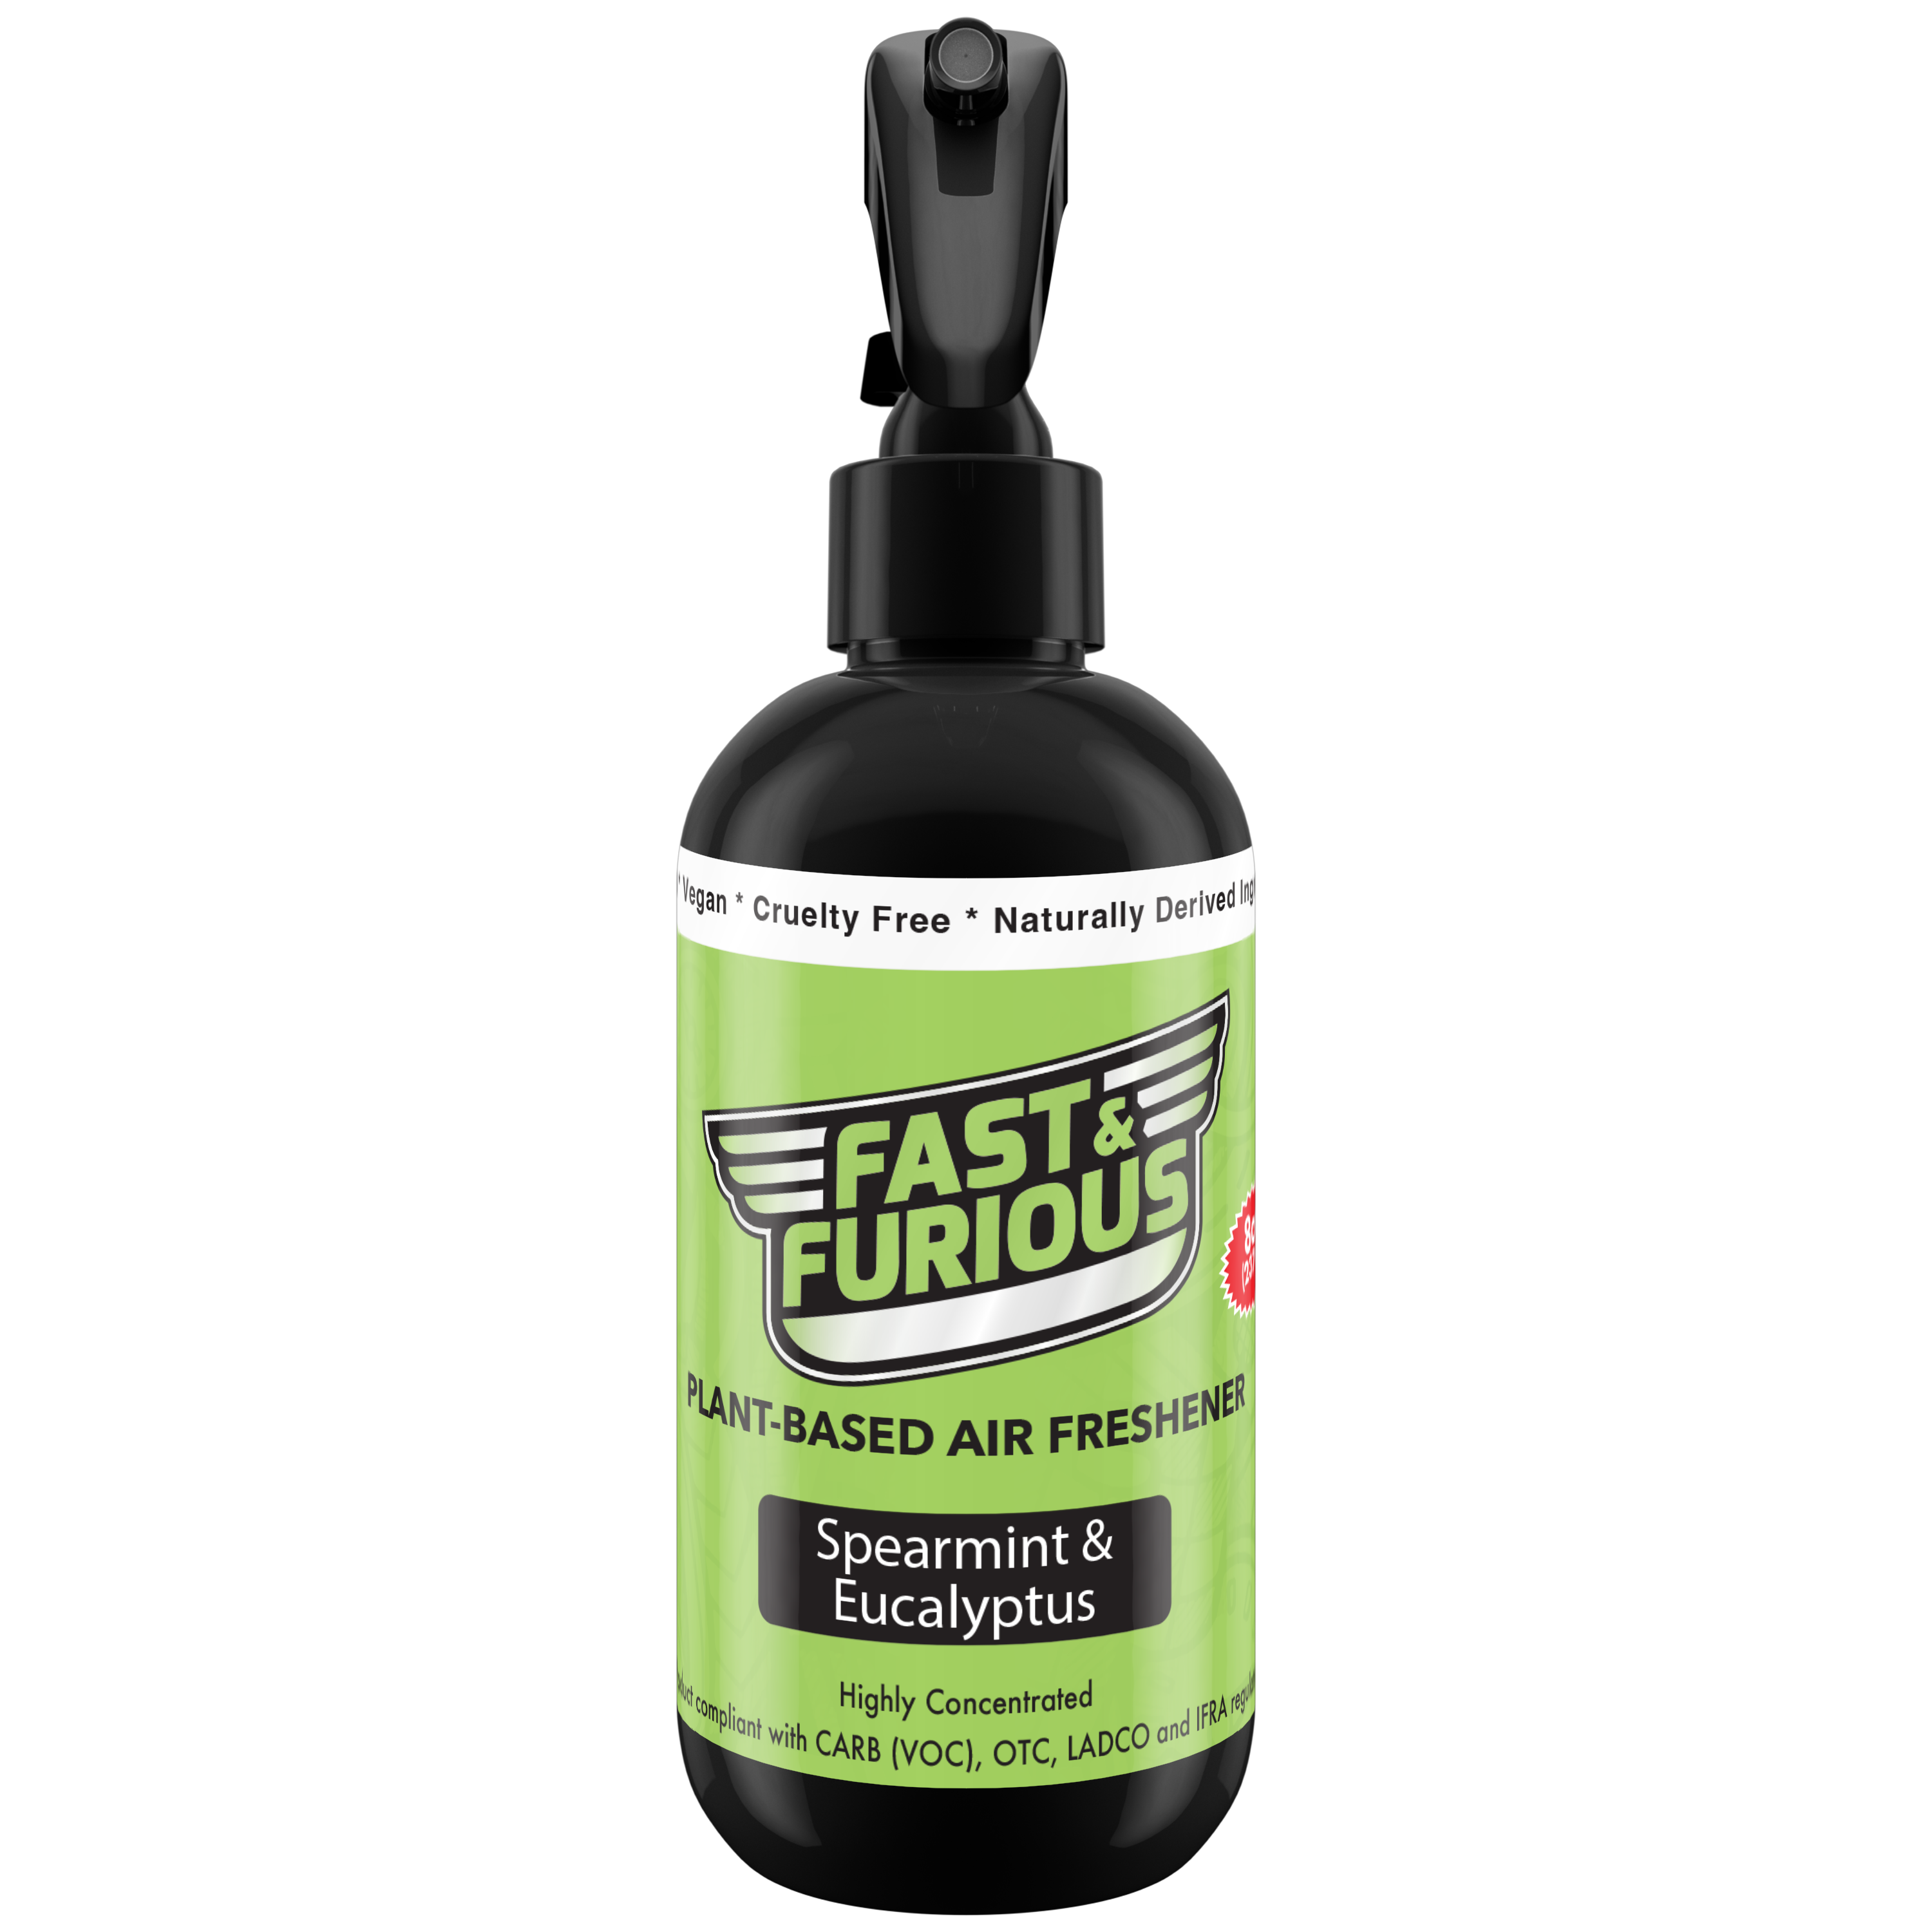 Fast and Furious Plant-Based Air Freshener - Spearmint & Eucalyptus Scent Size: 8oz